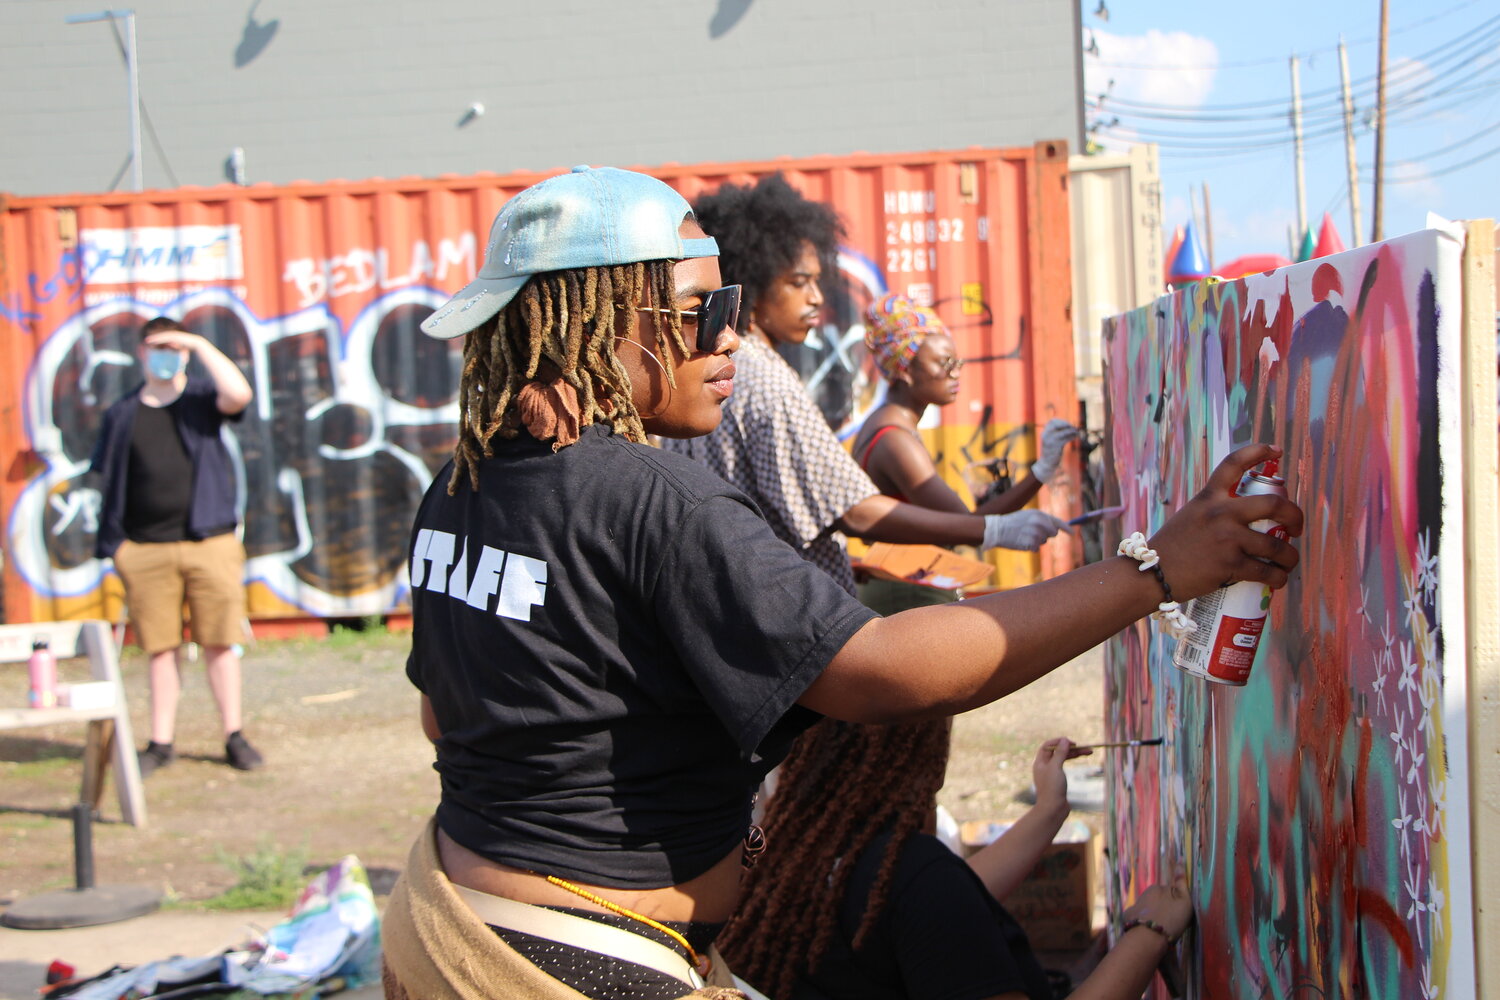 Artist Athena spray paints a graffiti wall with artists at the Soul of the Southside festival on Monday, June 19.